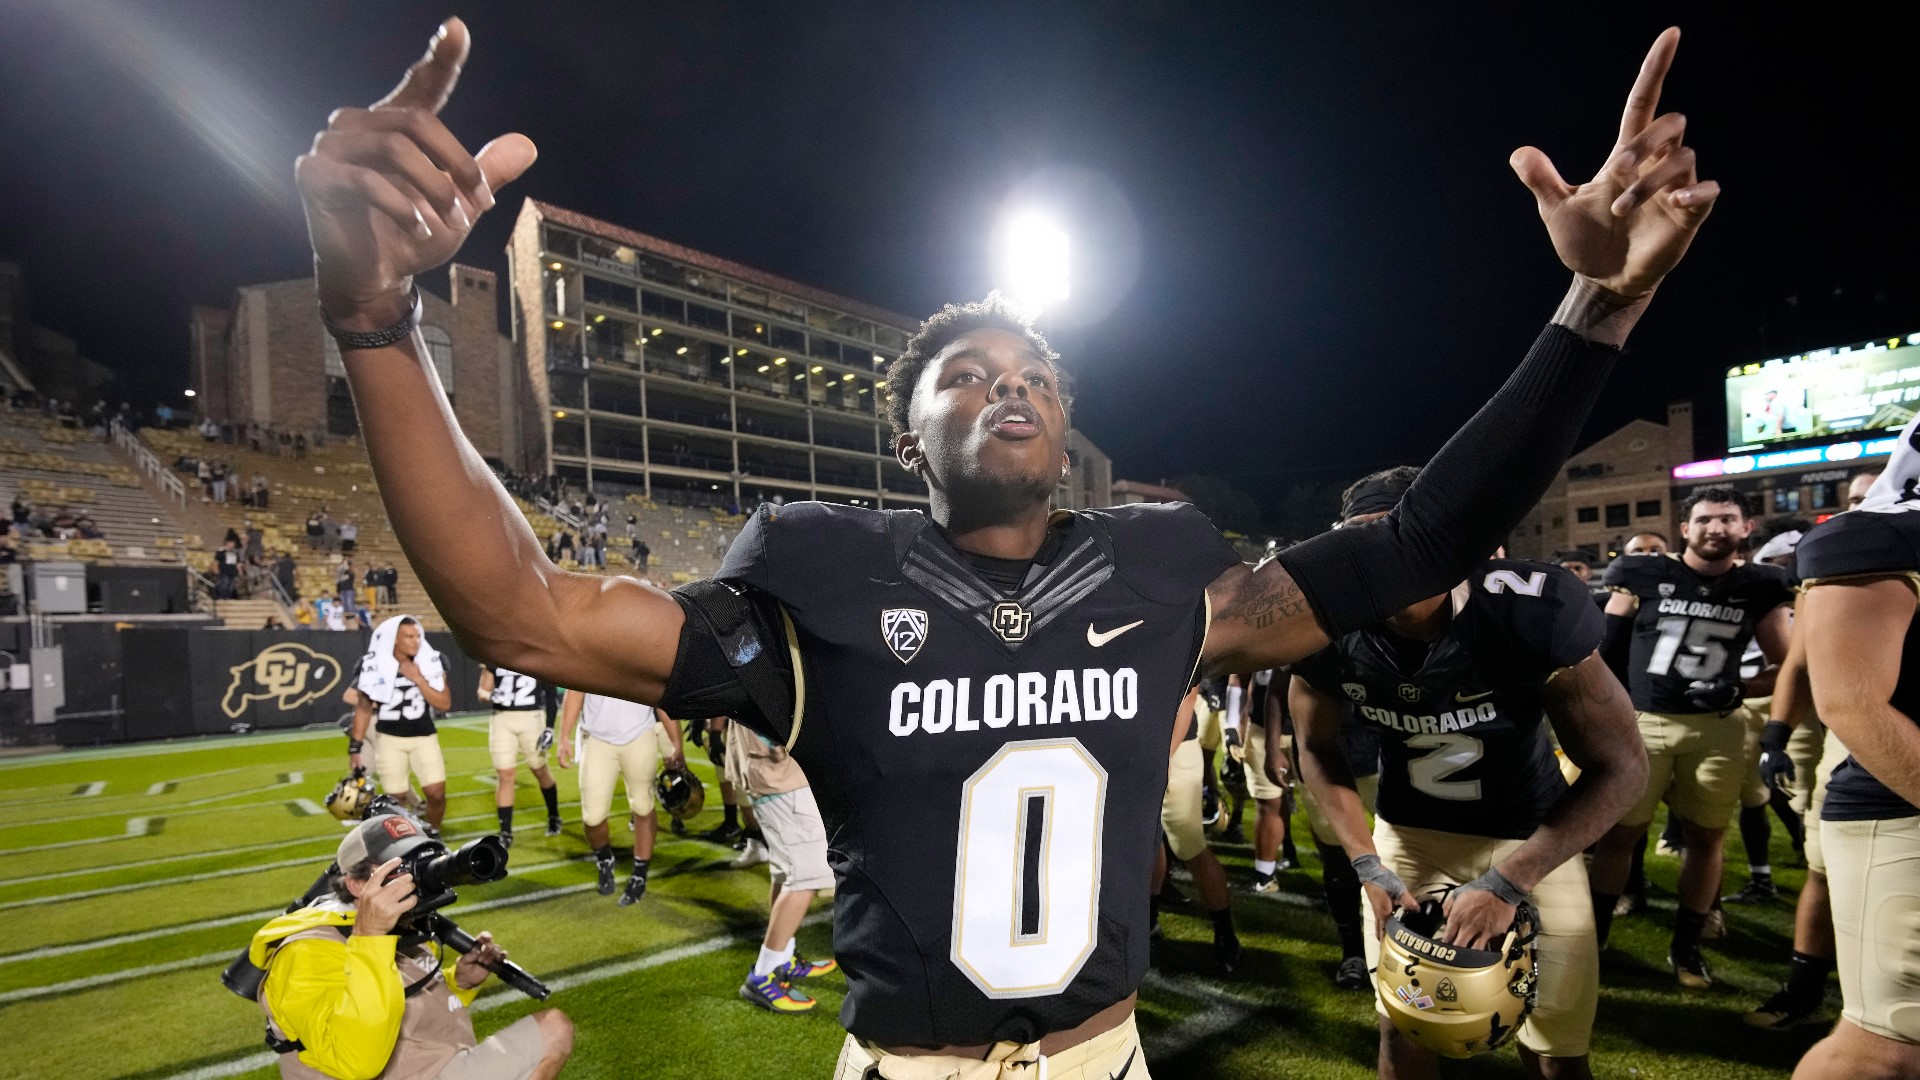 Freshman quarterback Brendon Lewis and the Colorado Buffaloes rumbled past Northern Colorado 35-7 Friday night.